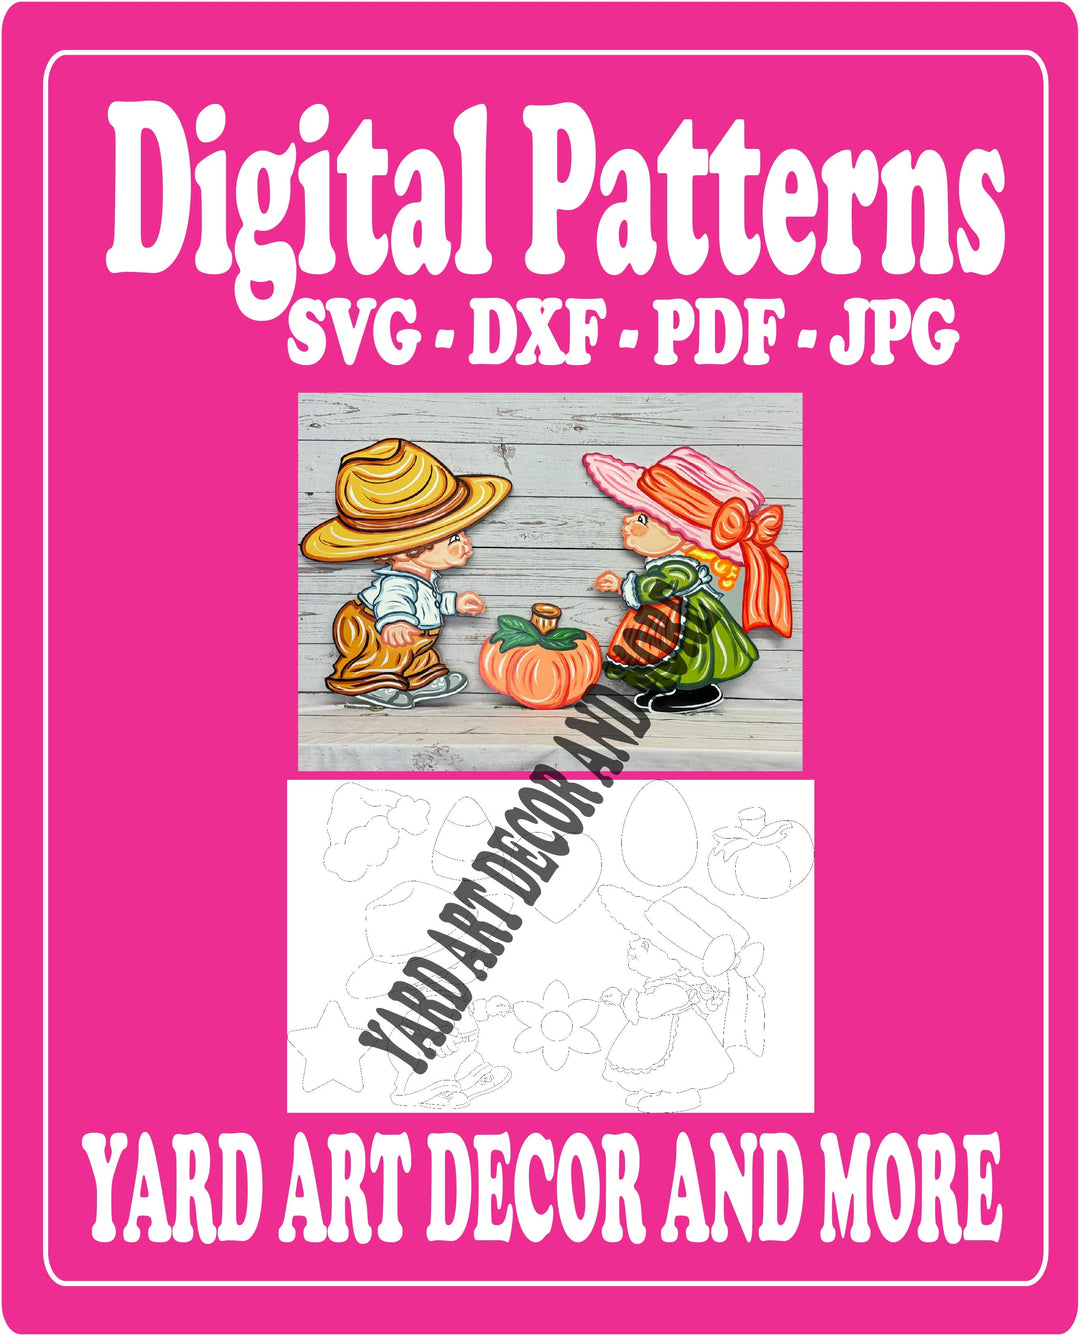 Cute Kids with Various Middle Signs Yard Art - SVG - DXF - PDF - JPG Files